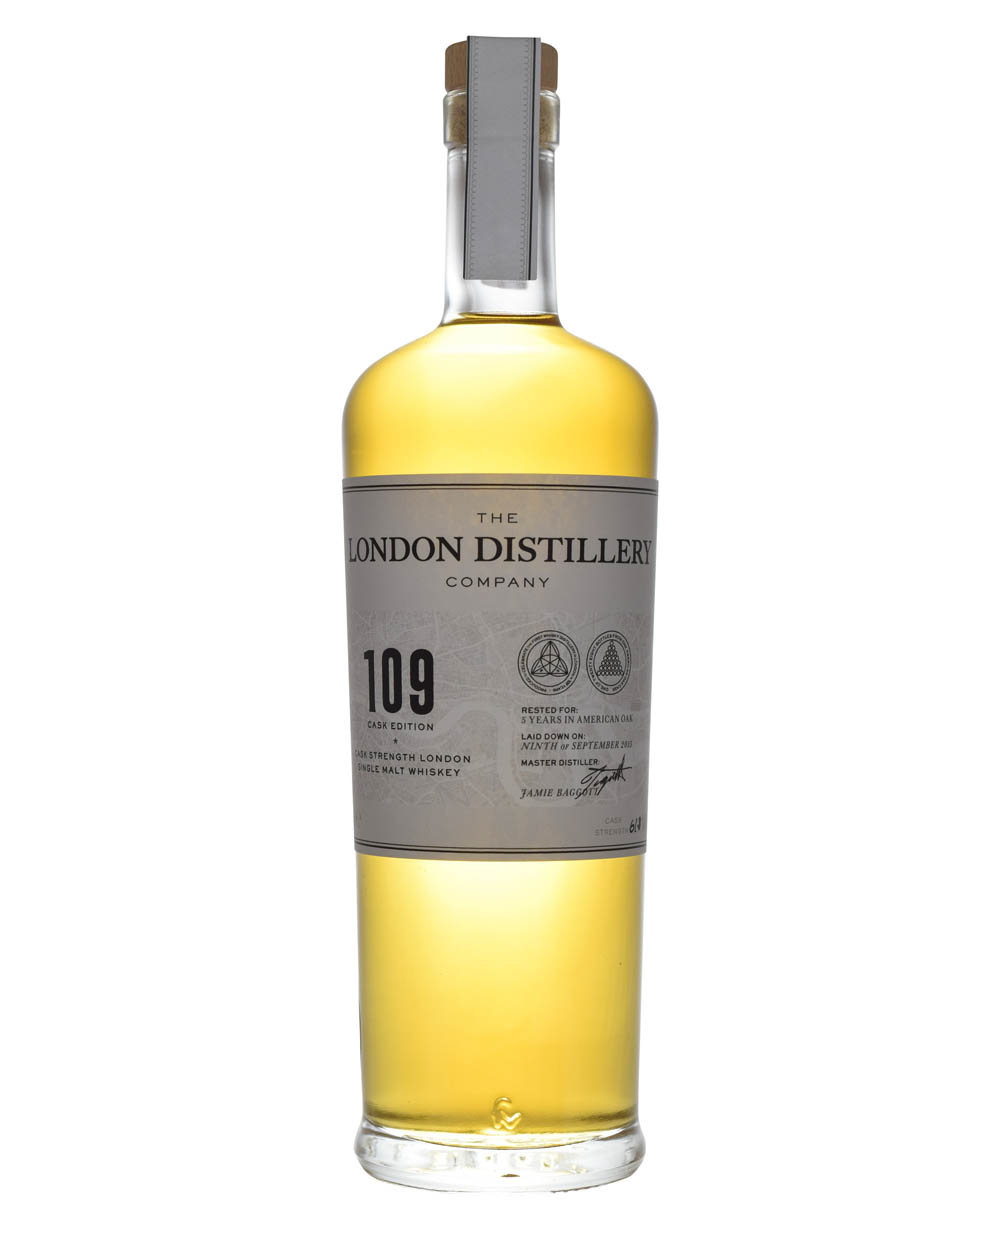 The London Distillery Company 109 Cask Edition Musthave Malts MHM